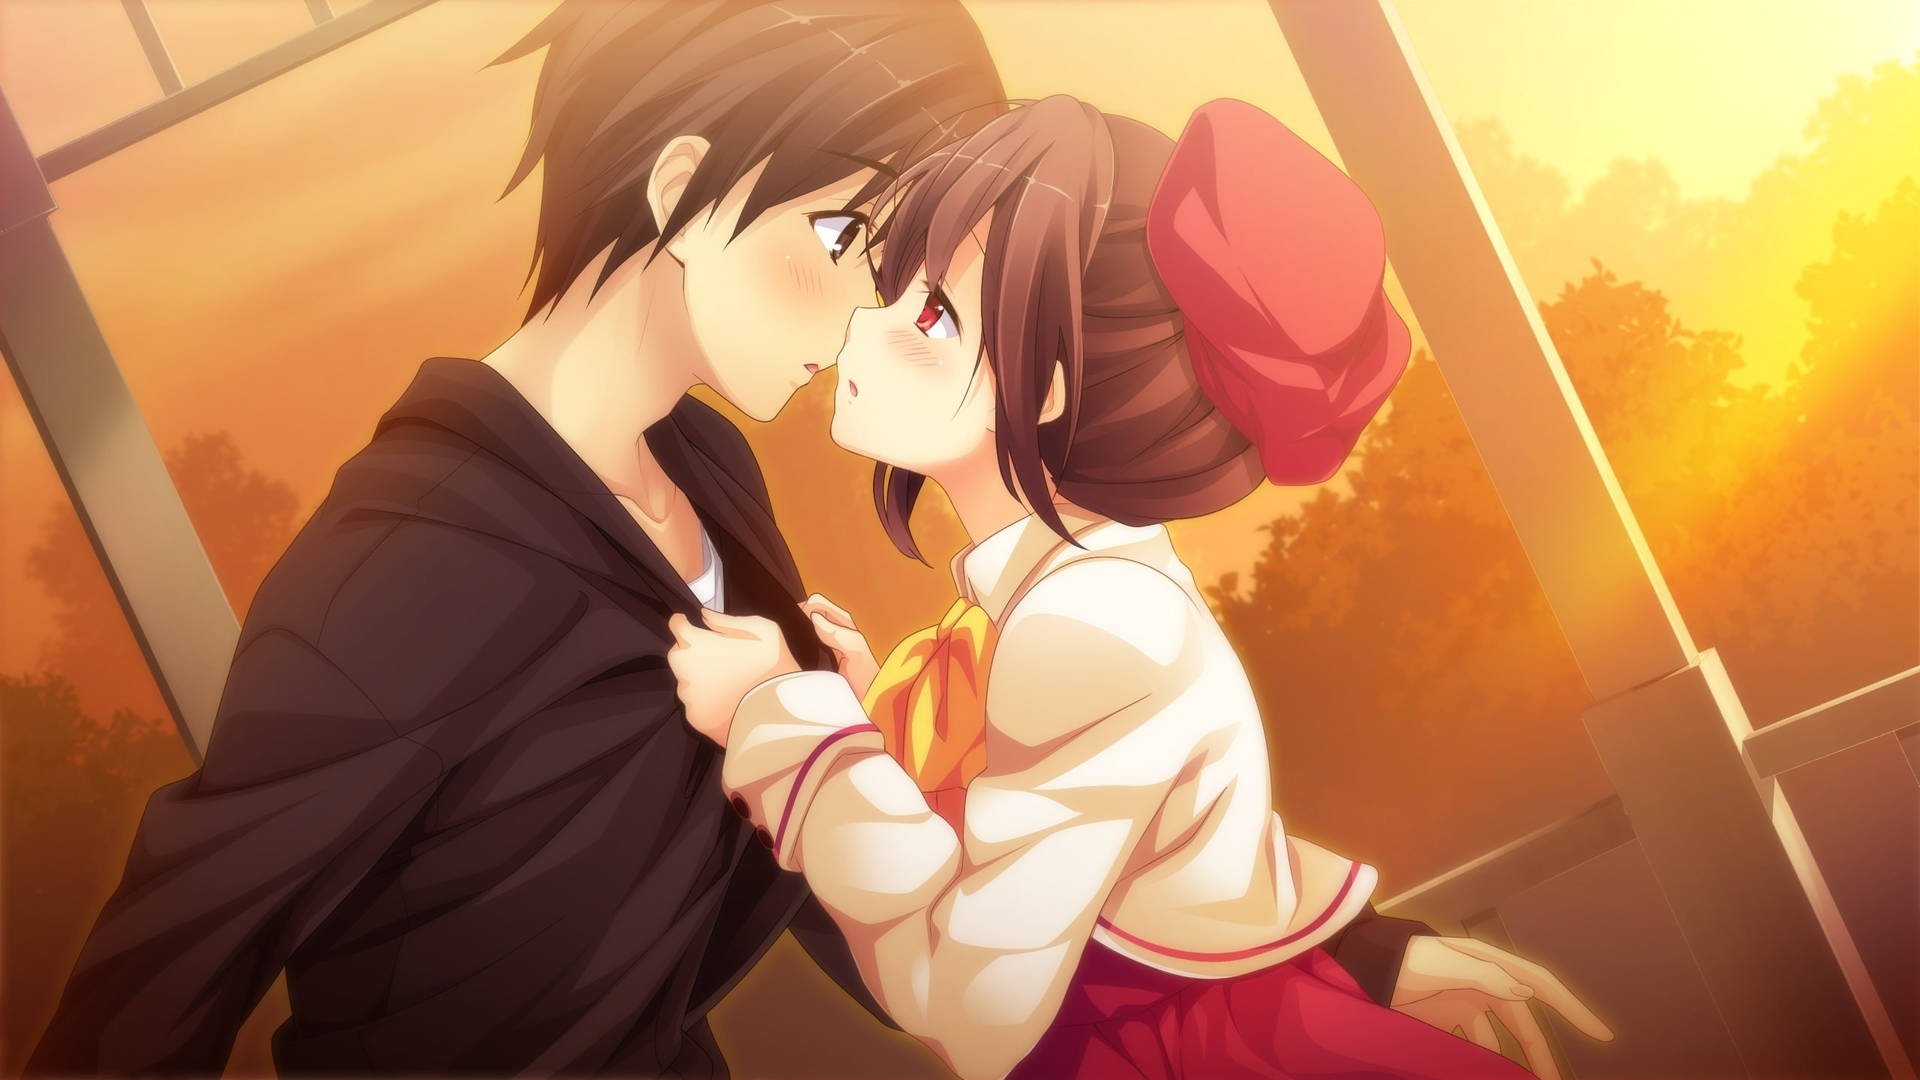 Cute Anime Couple Almost Kiss Background